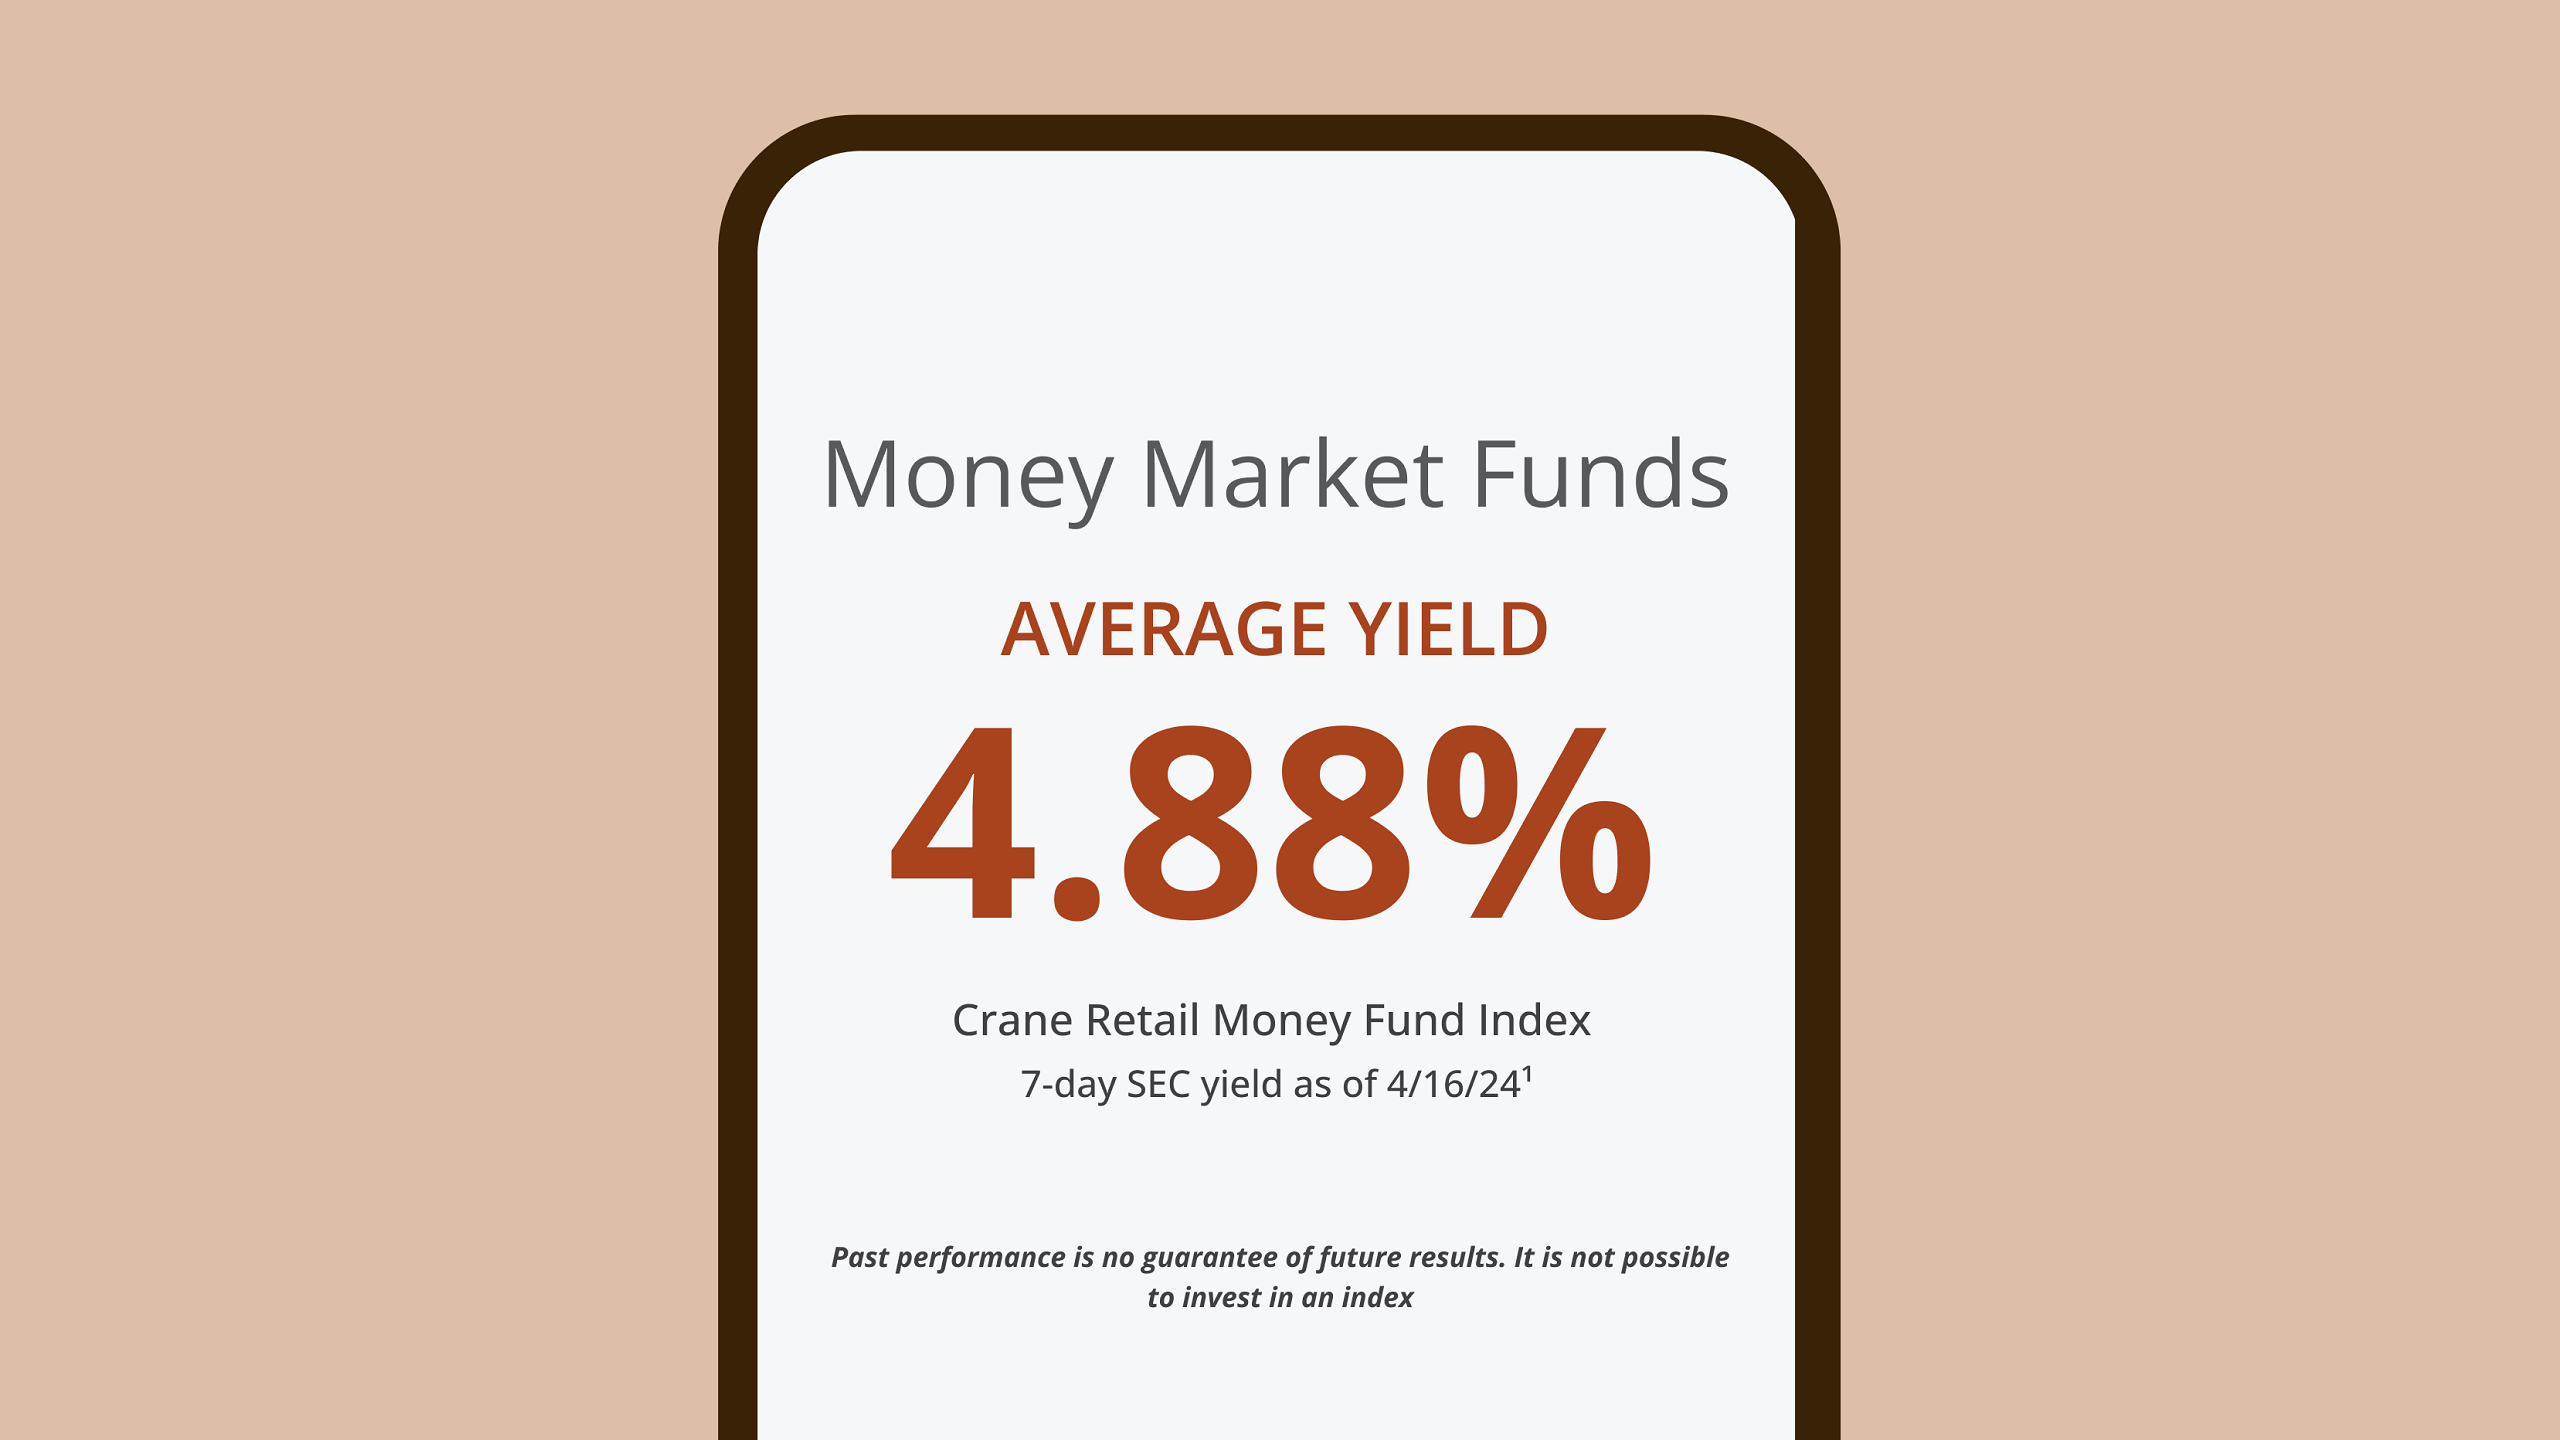 Money market funds 4.88% avg yield as per Crane data. Past performance is no guarantee of future results. It is not possible to invest in an index.